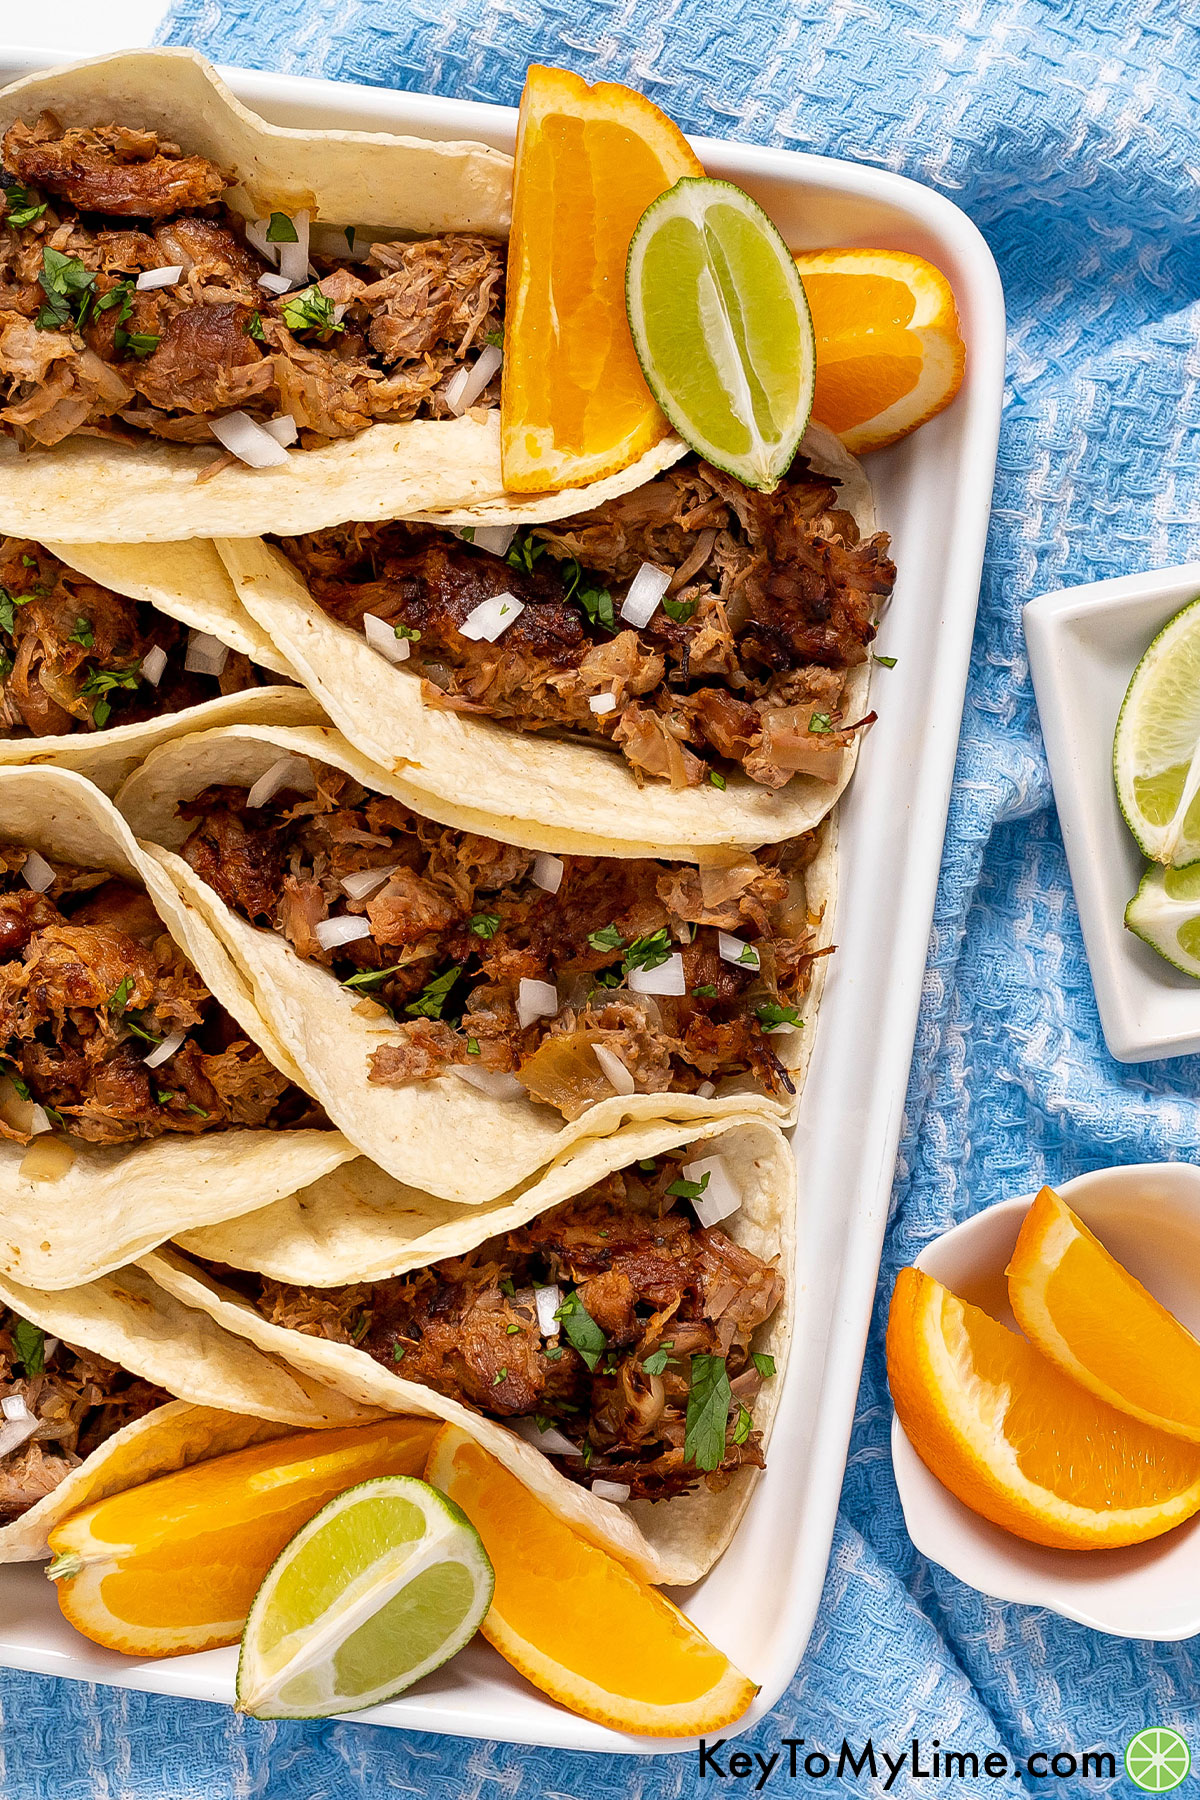 Pork carnitas that's been cooked in orange juice and lime juice.